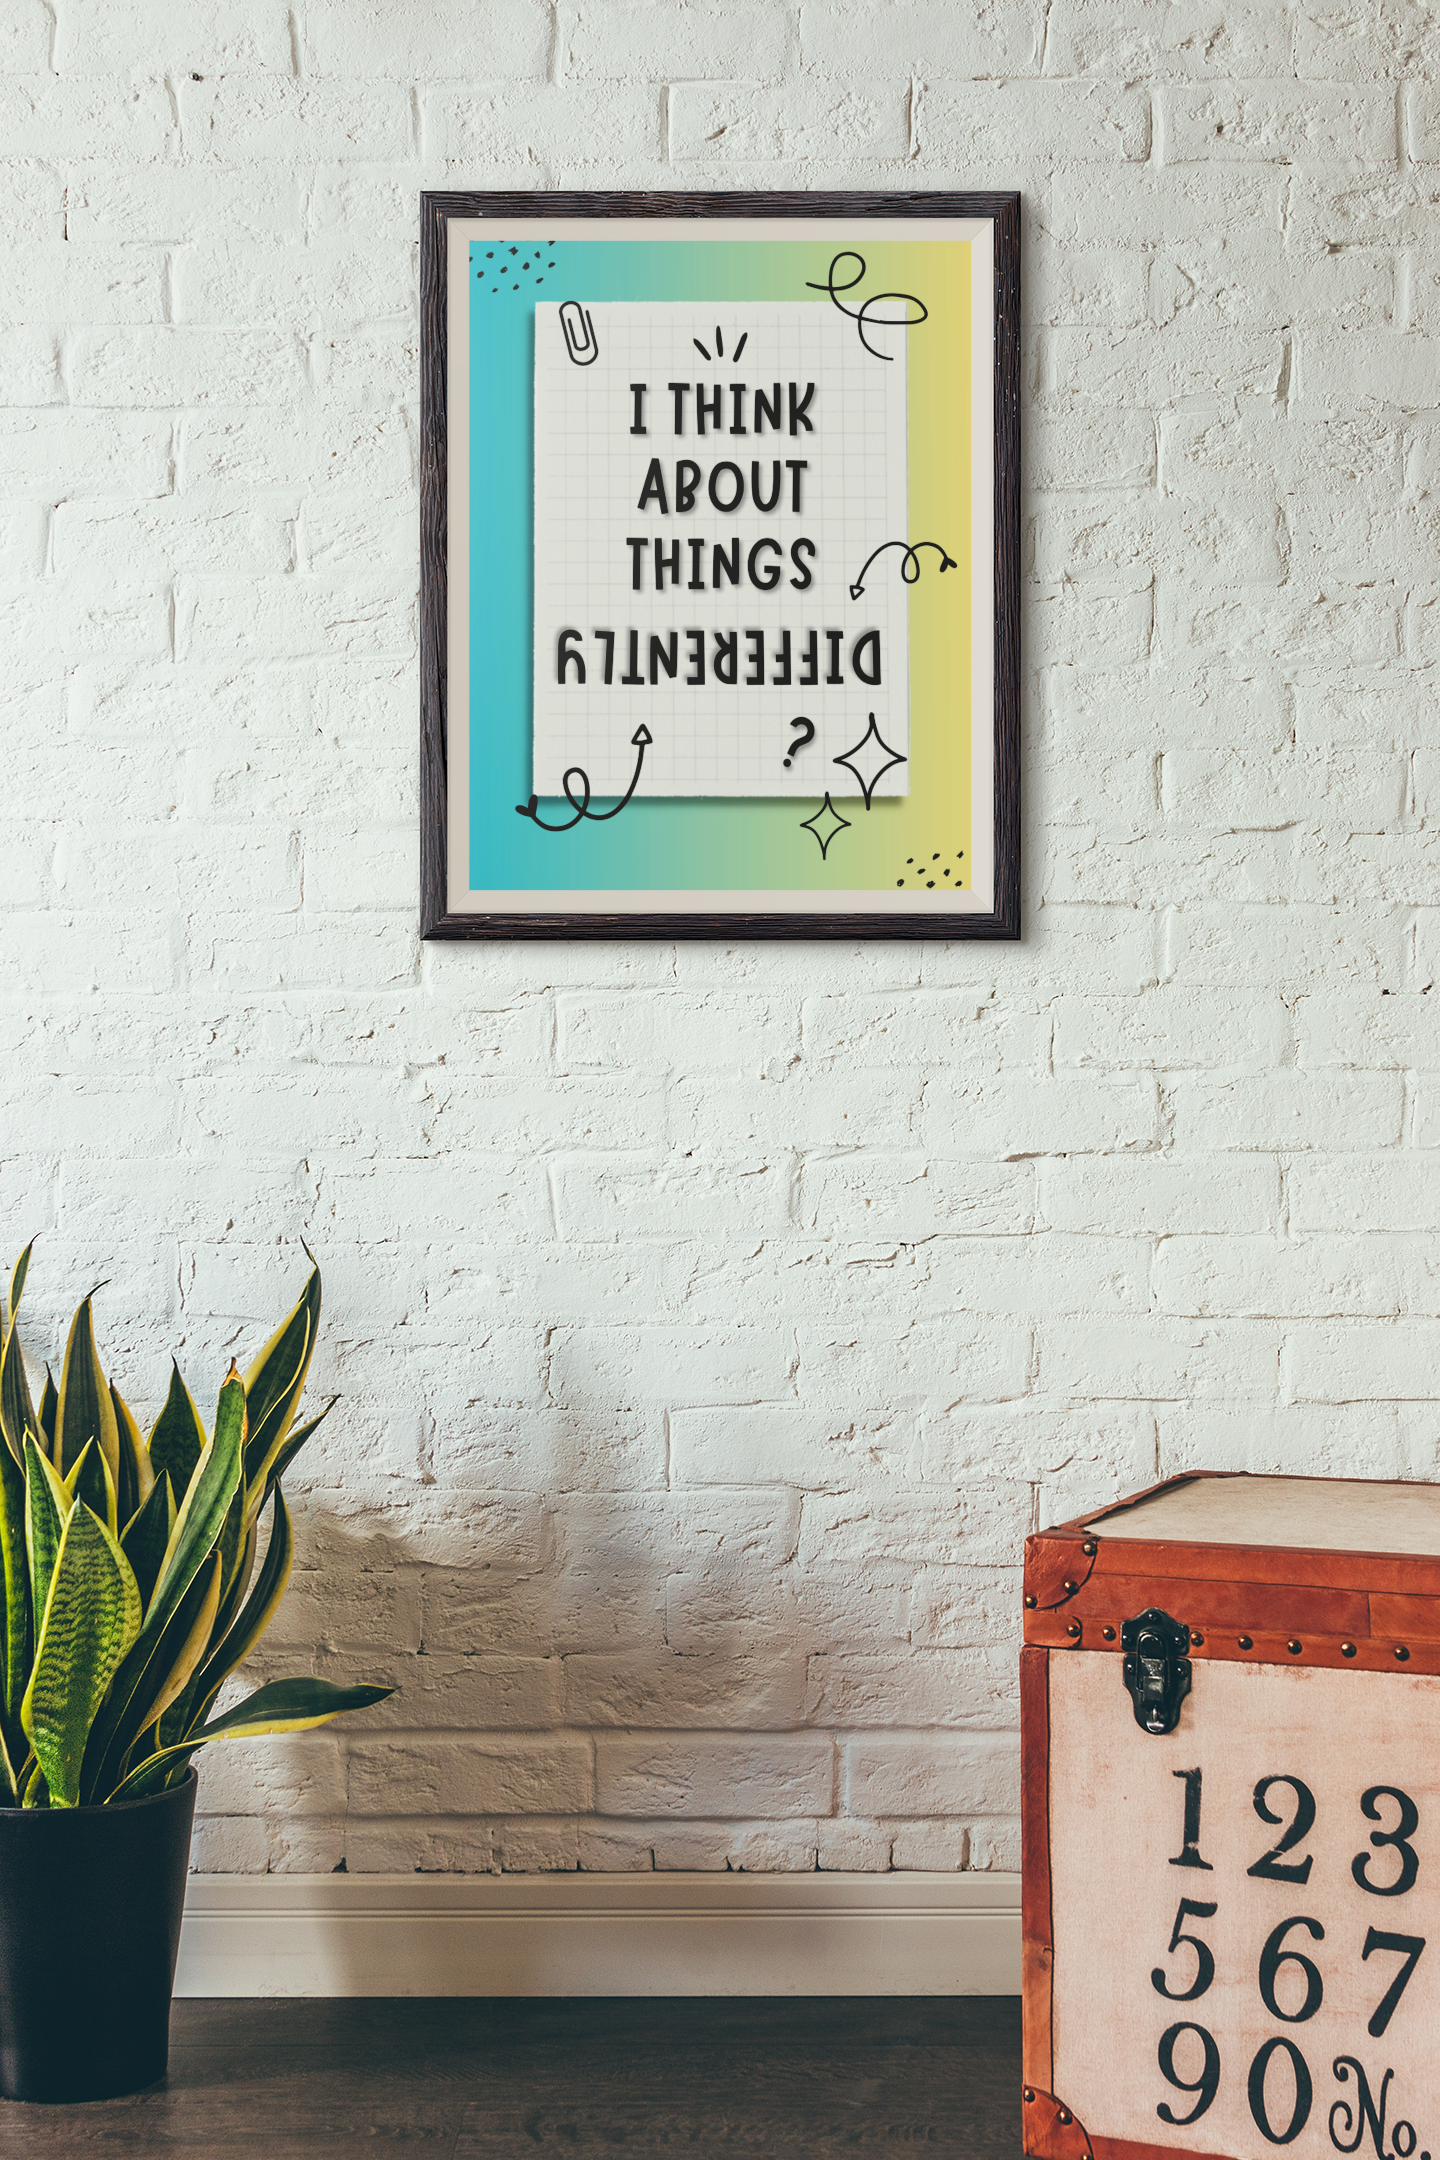 BEING DIFFERENT - QUIRKY, UNIQUE WALL ART - A Poster in TURQUIOSE to GOLD tones about you!